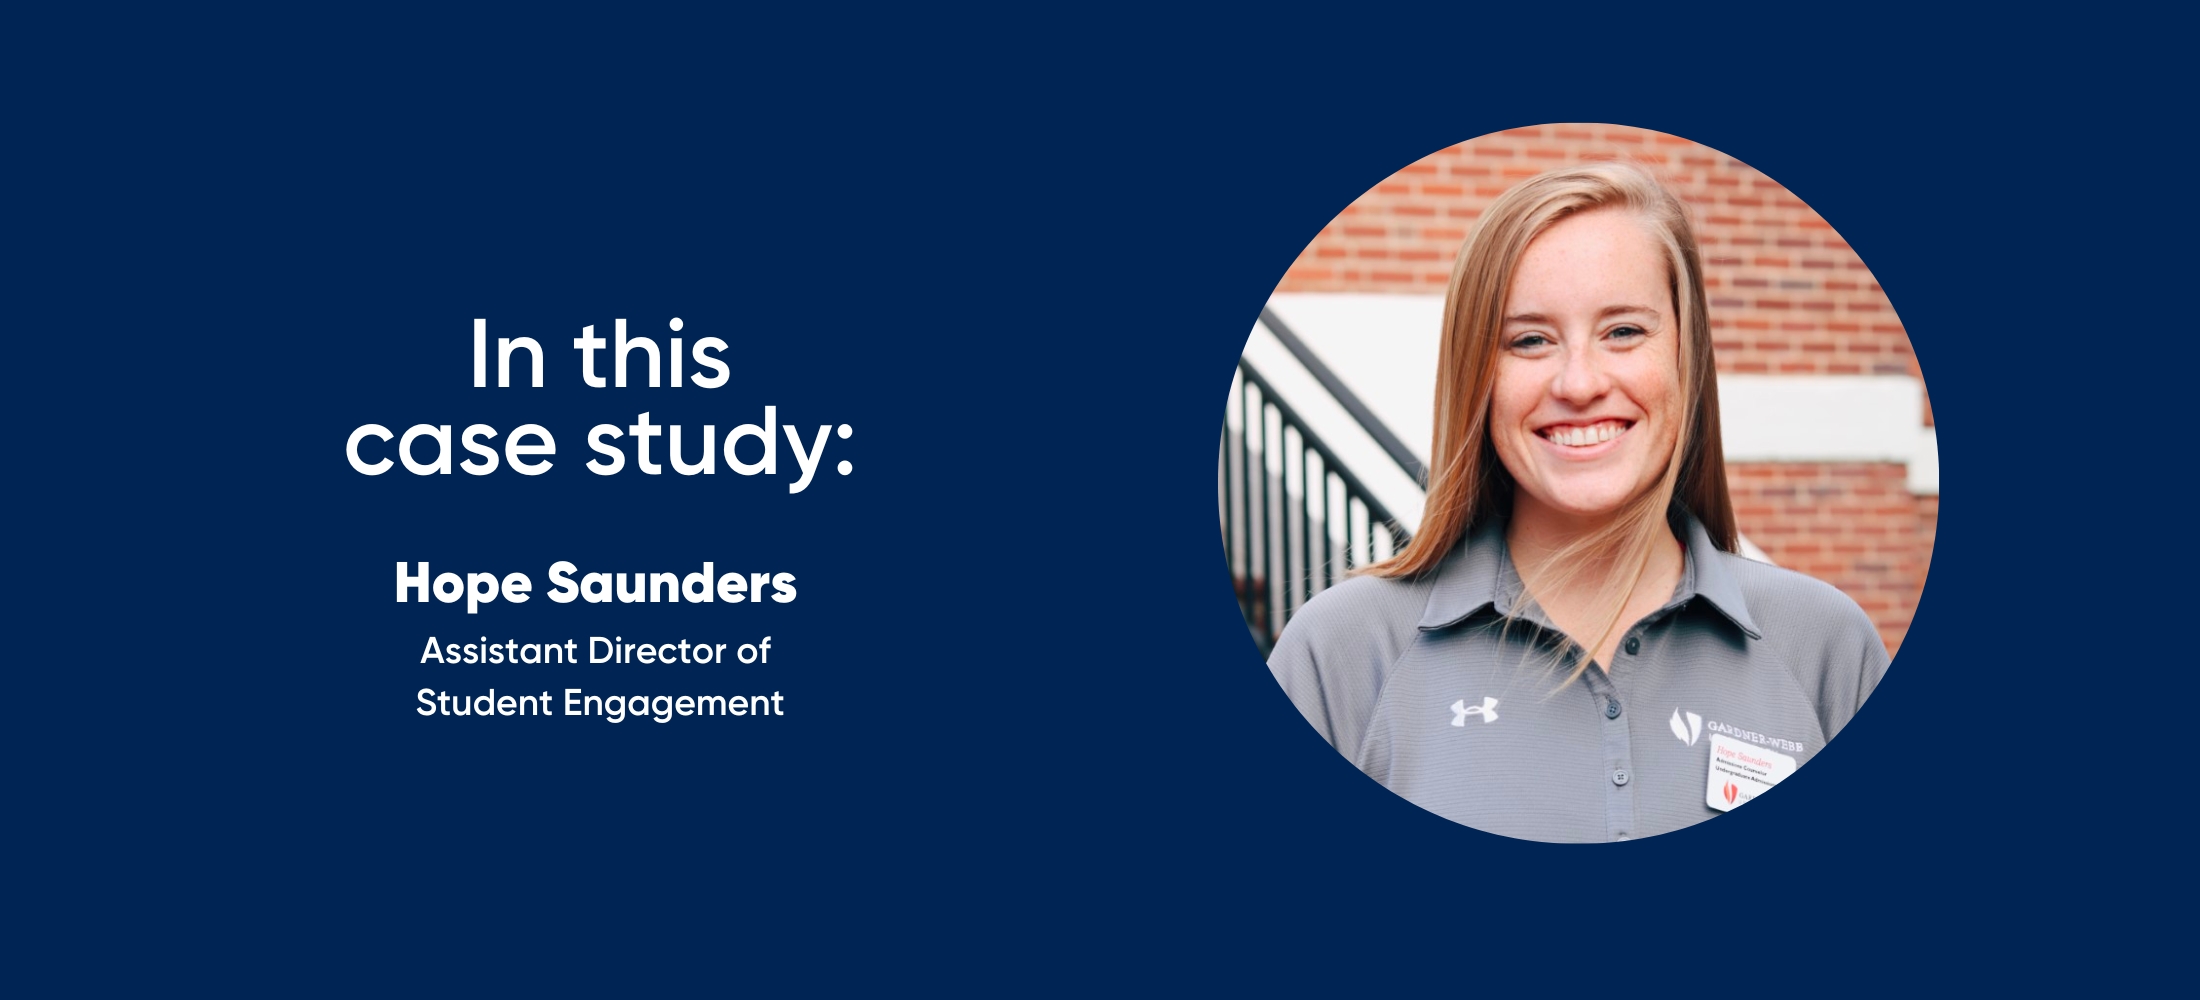 in this case study: Hope Saunders, assistant director of student engagement